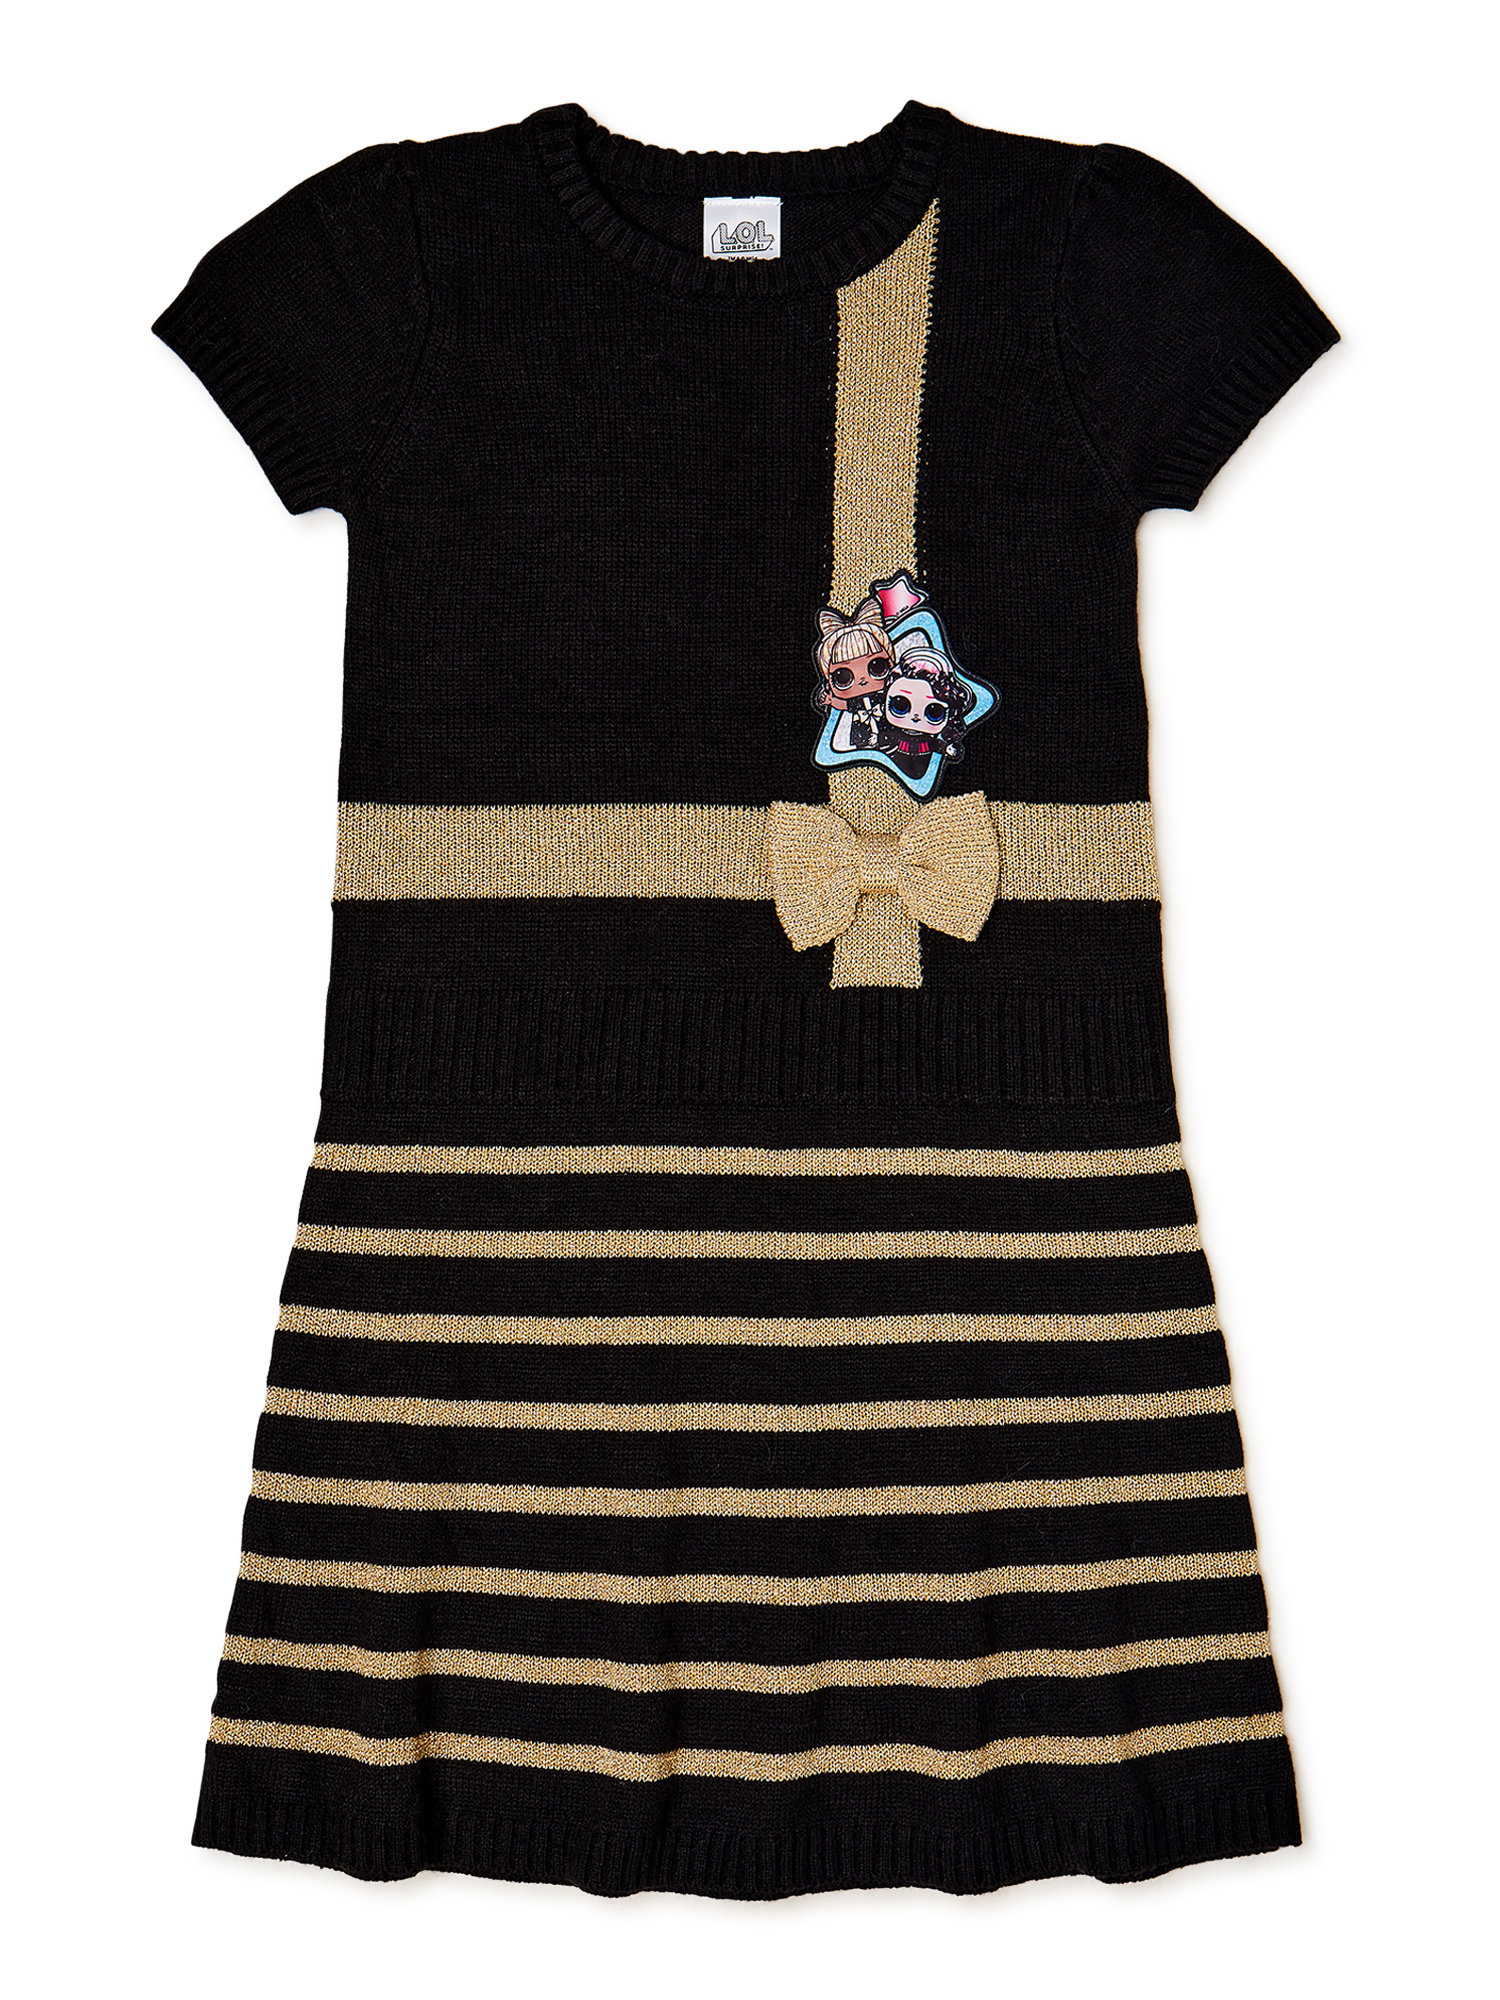 L.O.L. Surprise! Girls’ Sweater Dress, Sizes 4-16 - image 1 of 4